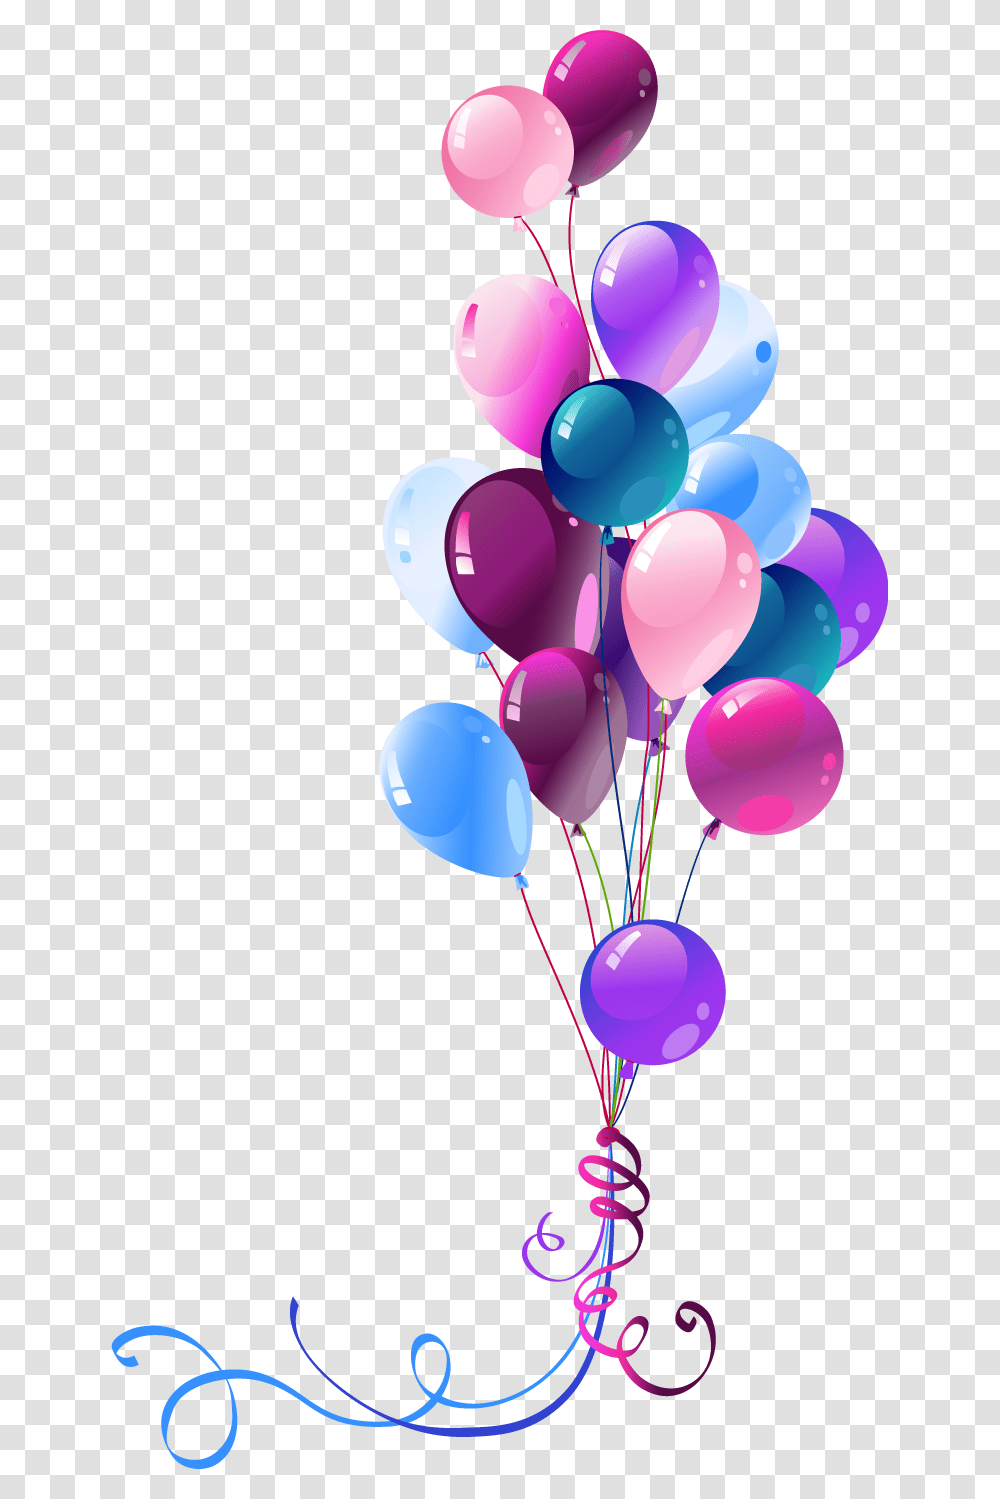 A Graphic Design Company Happy Birthday Balloon Transparent Png